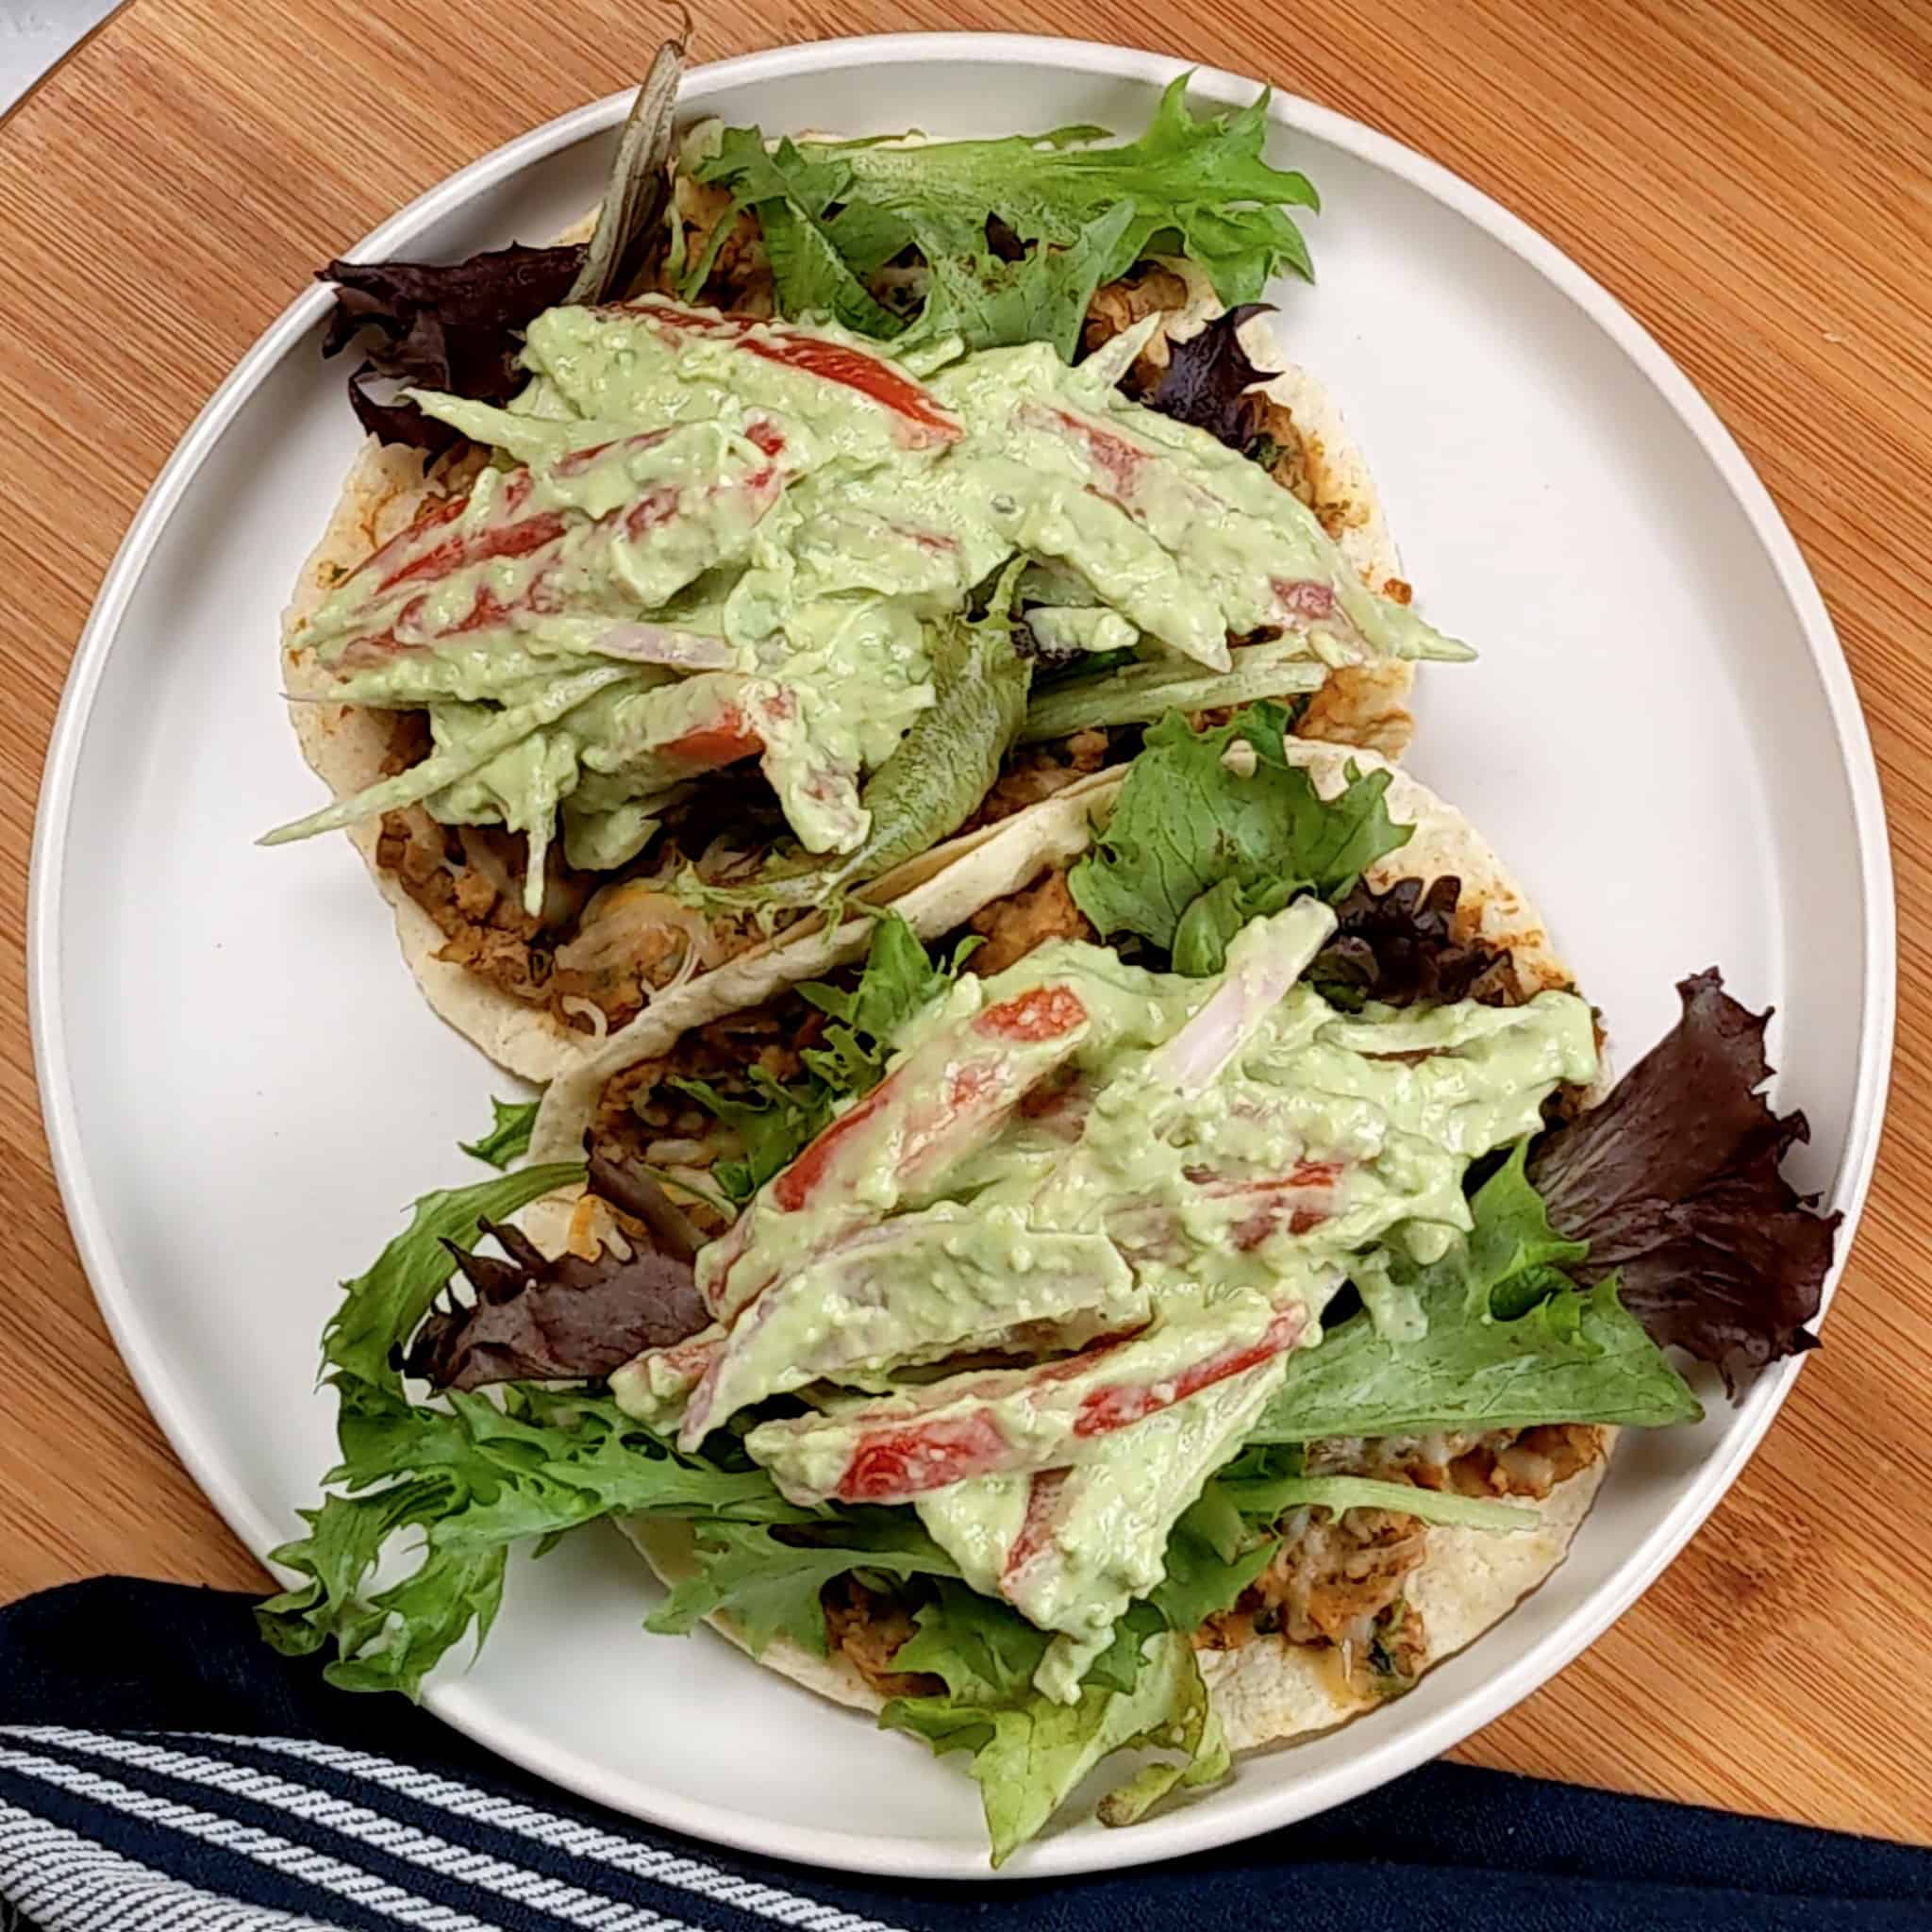 two flour tortillas packed with cooked seasoned ground turkey and refried beans and melted cheese, topped with mixed greens, and avocado cream tomato salad on a round flat plate with shallow straight sides.